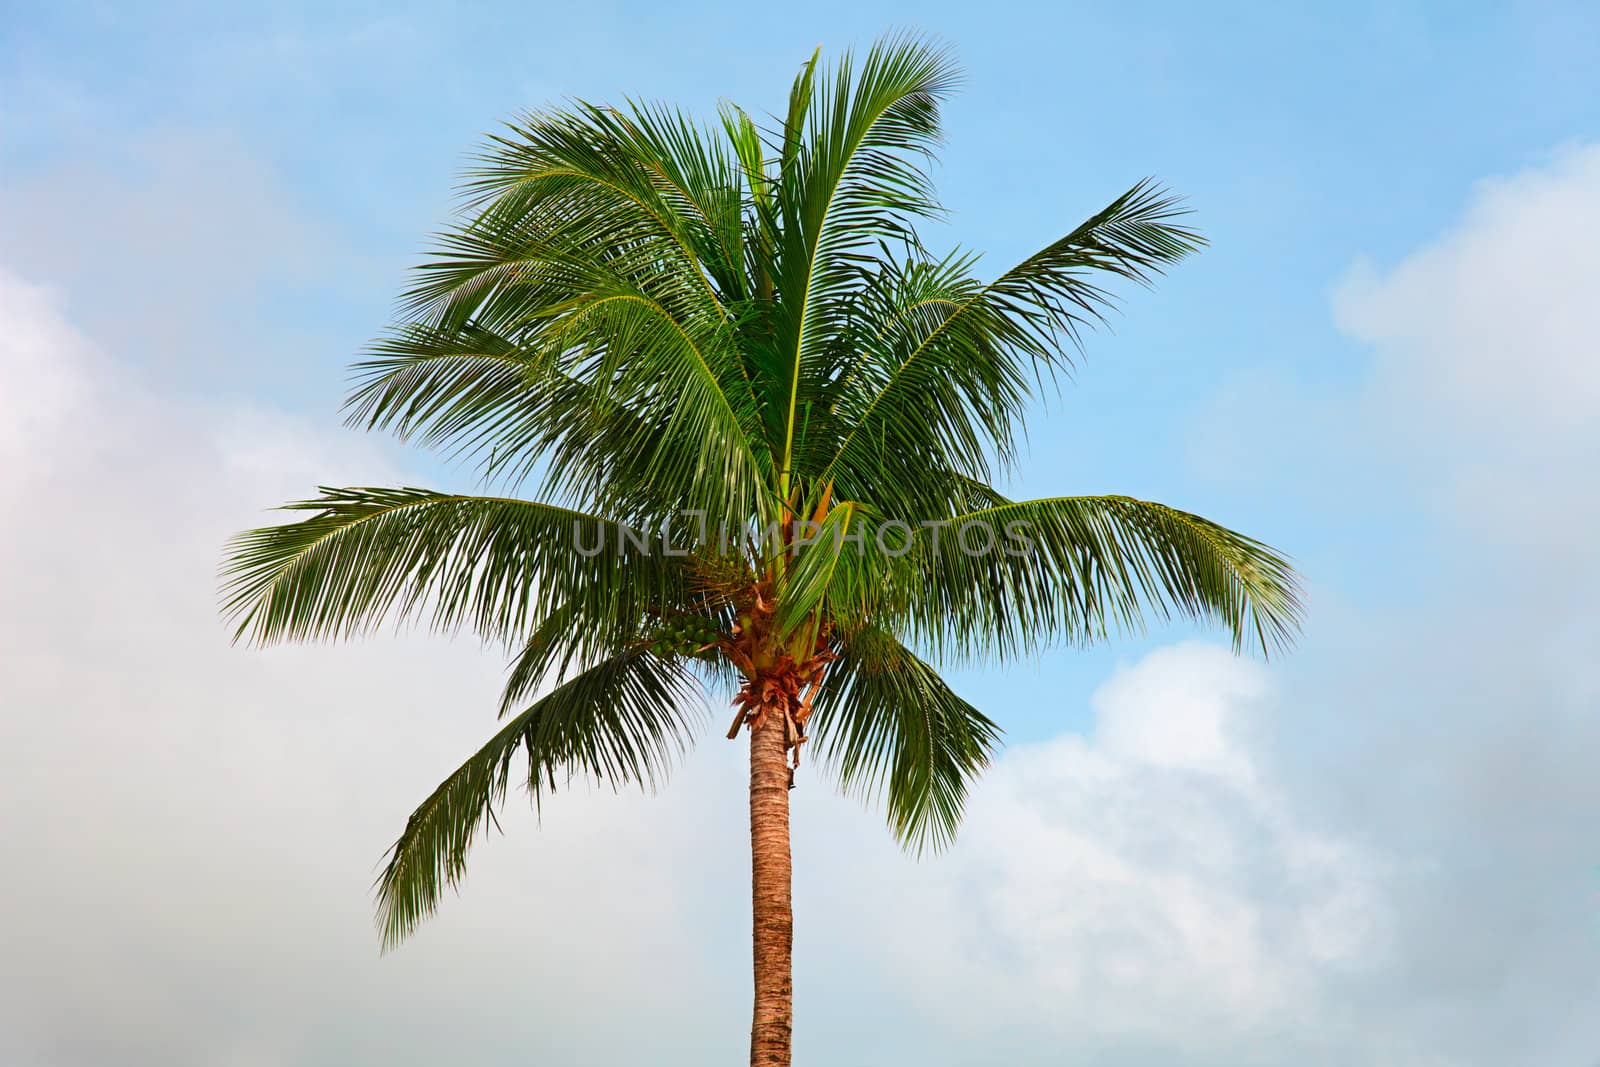 Top of a coconut tree on sky background by pzaxe